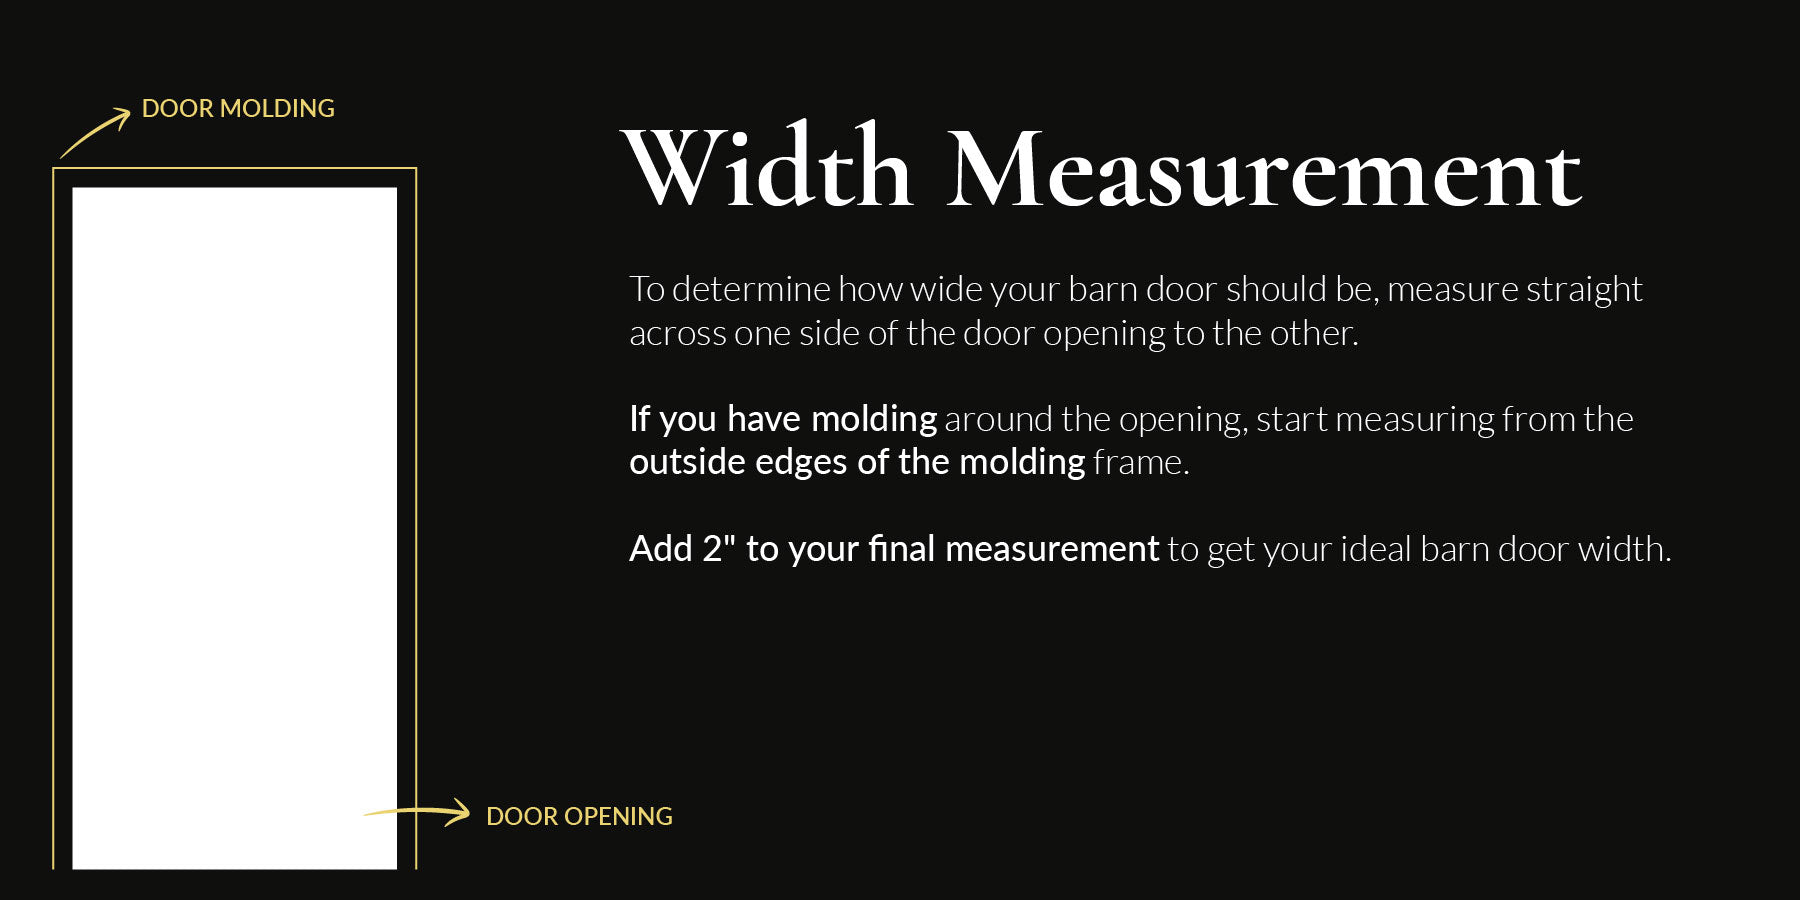 How to determine your barn door width illustration on a black background. The text on the image is the same as the text below it.